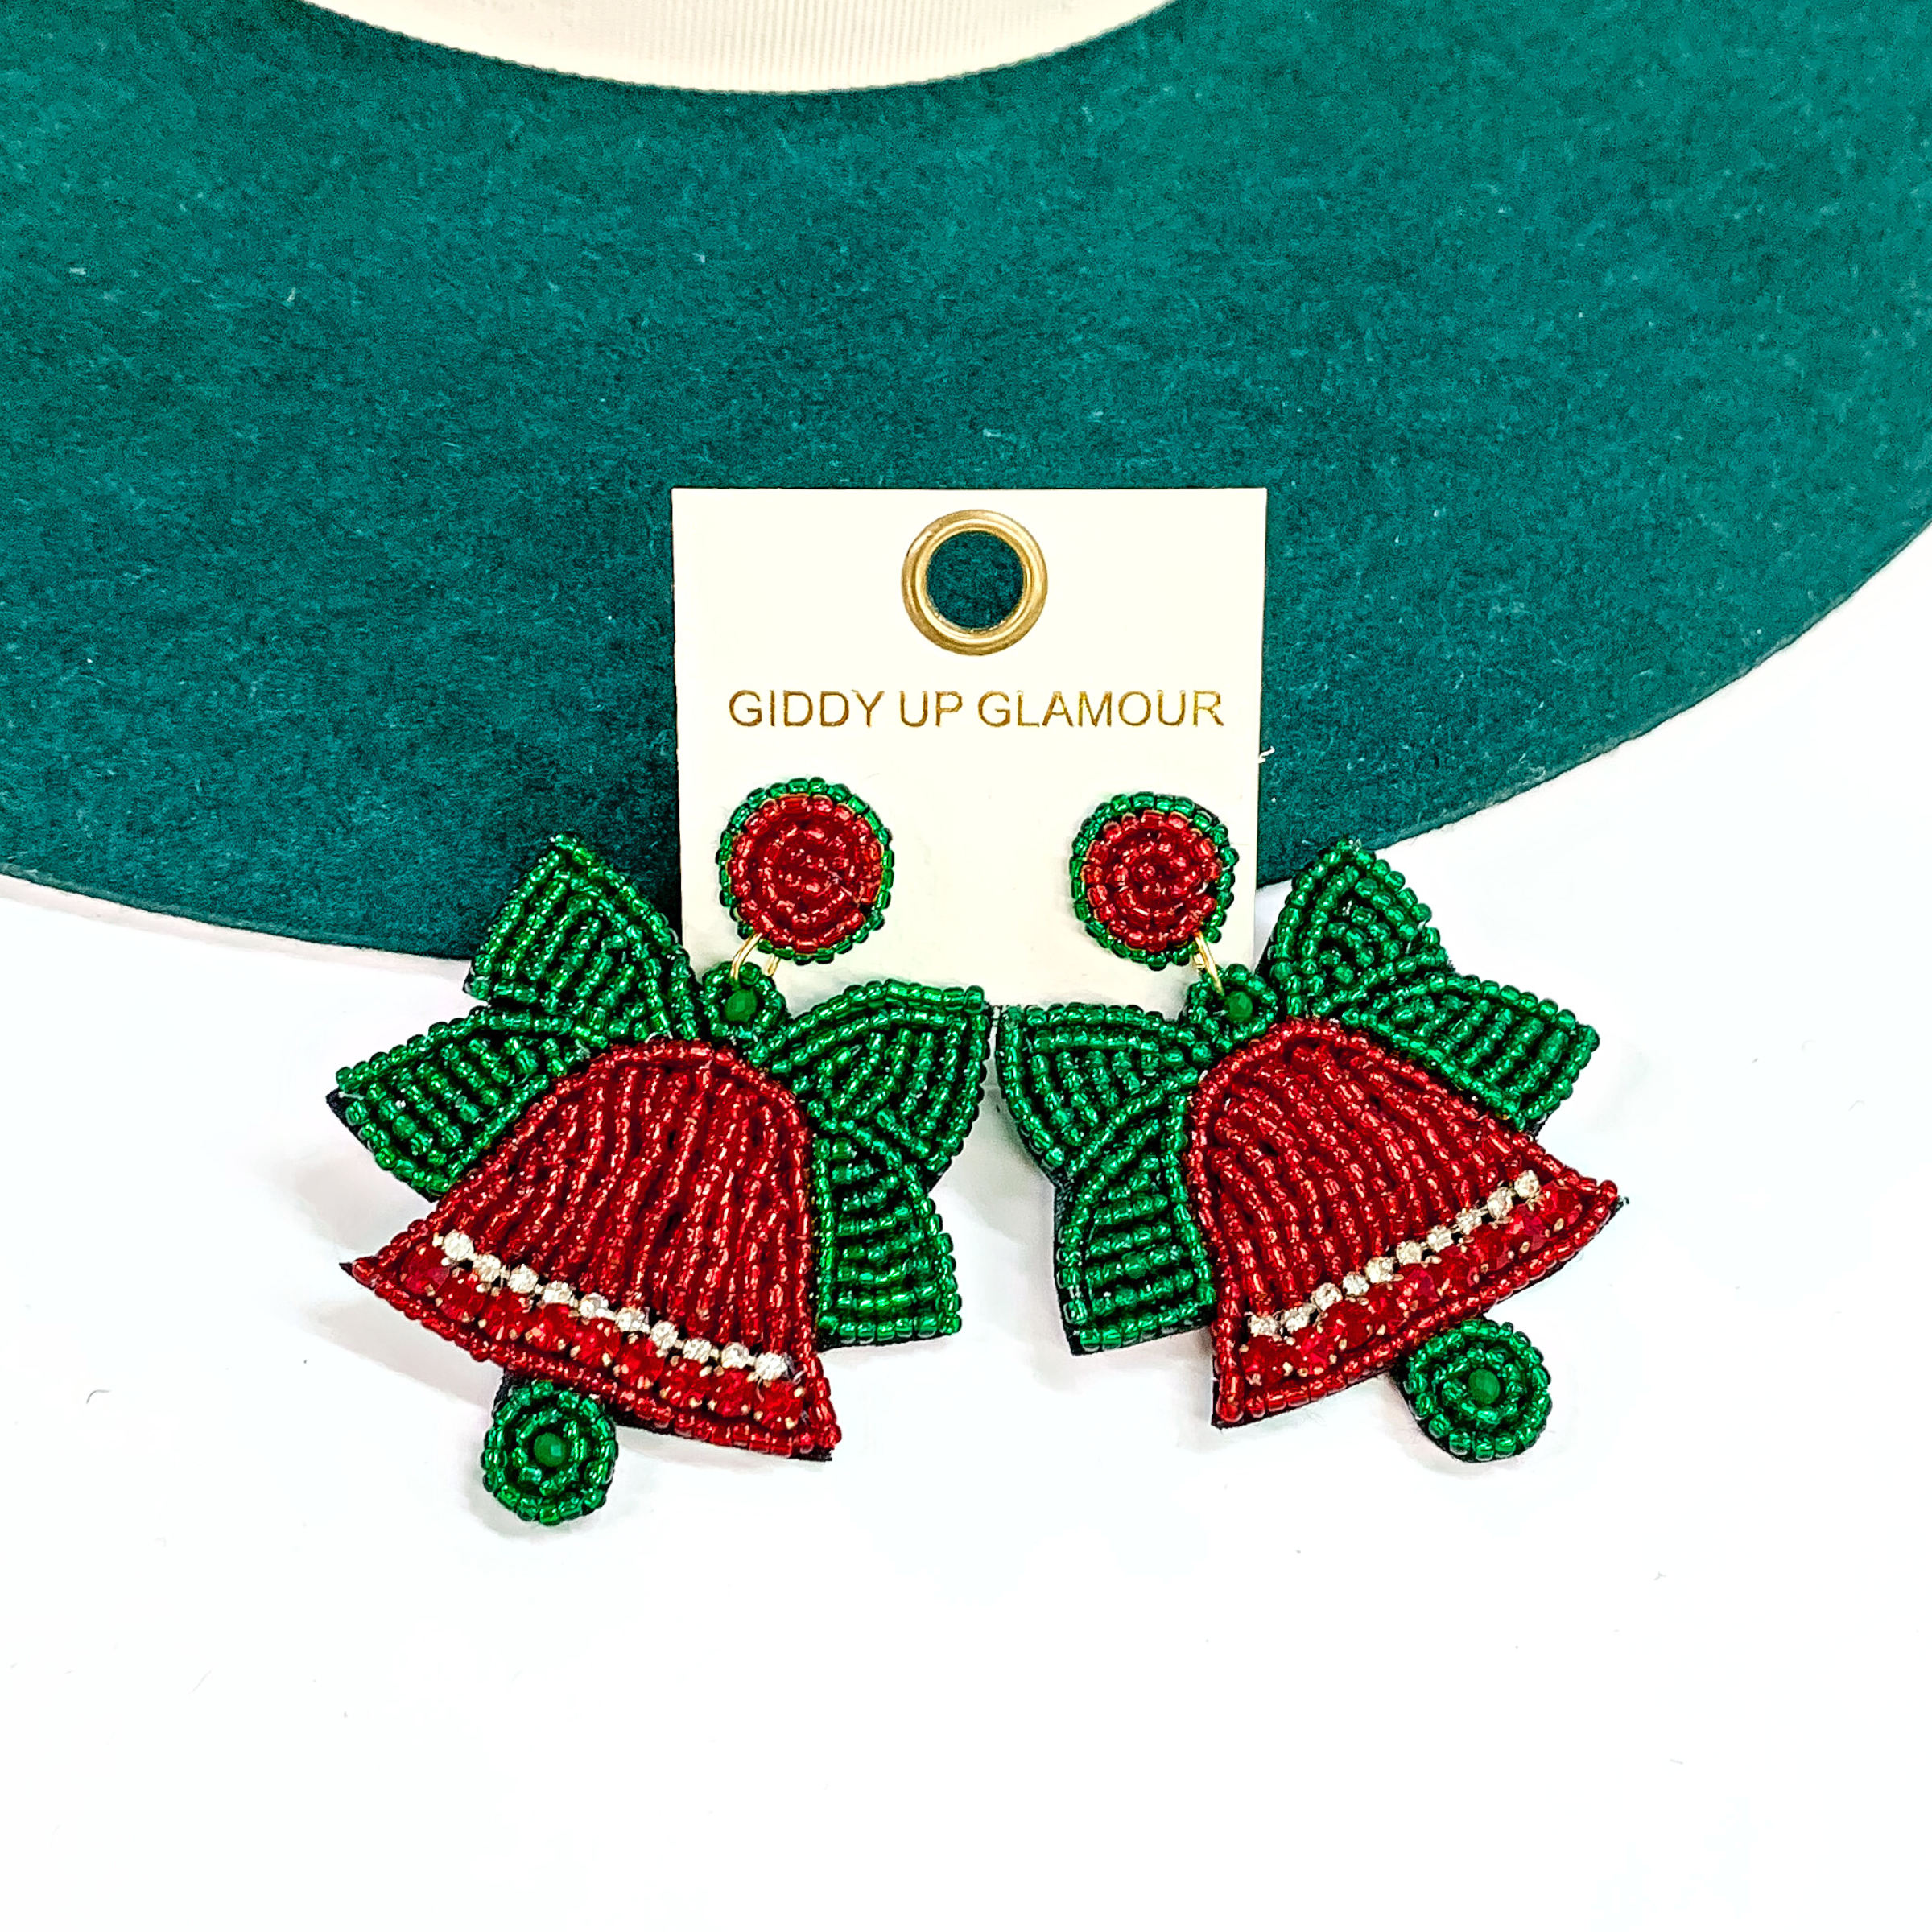 These are Christmas bell red and green seedbeaded earrings with a clear crystal bad across the red bell. The bell and postback are red, there is a green seedbeaded bwon on top of the bell. These earrings are taken laying on a dark green felt hat brim and on a white background.